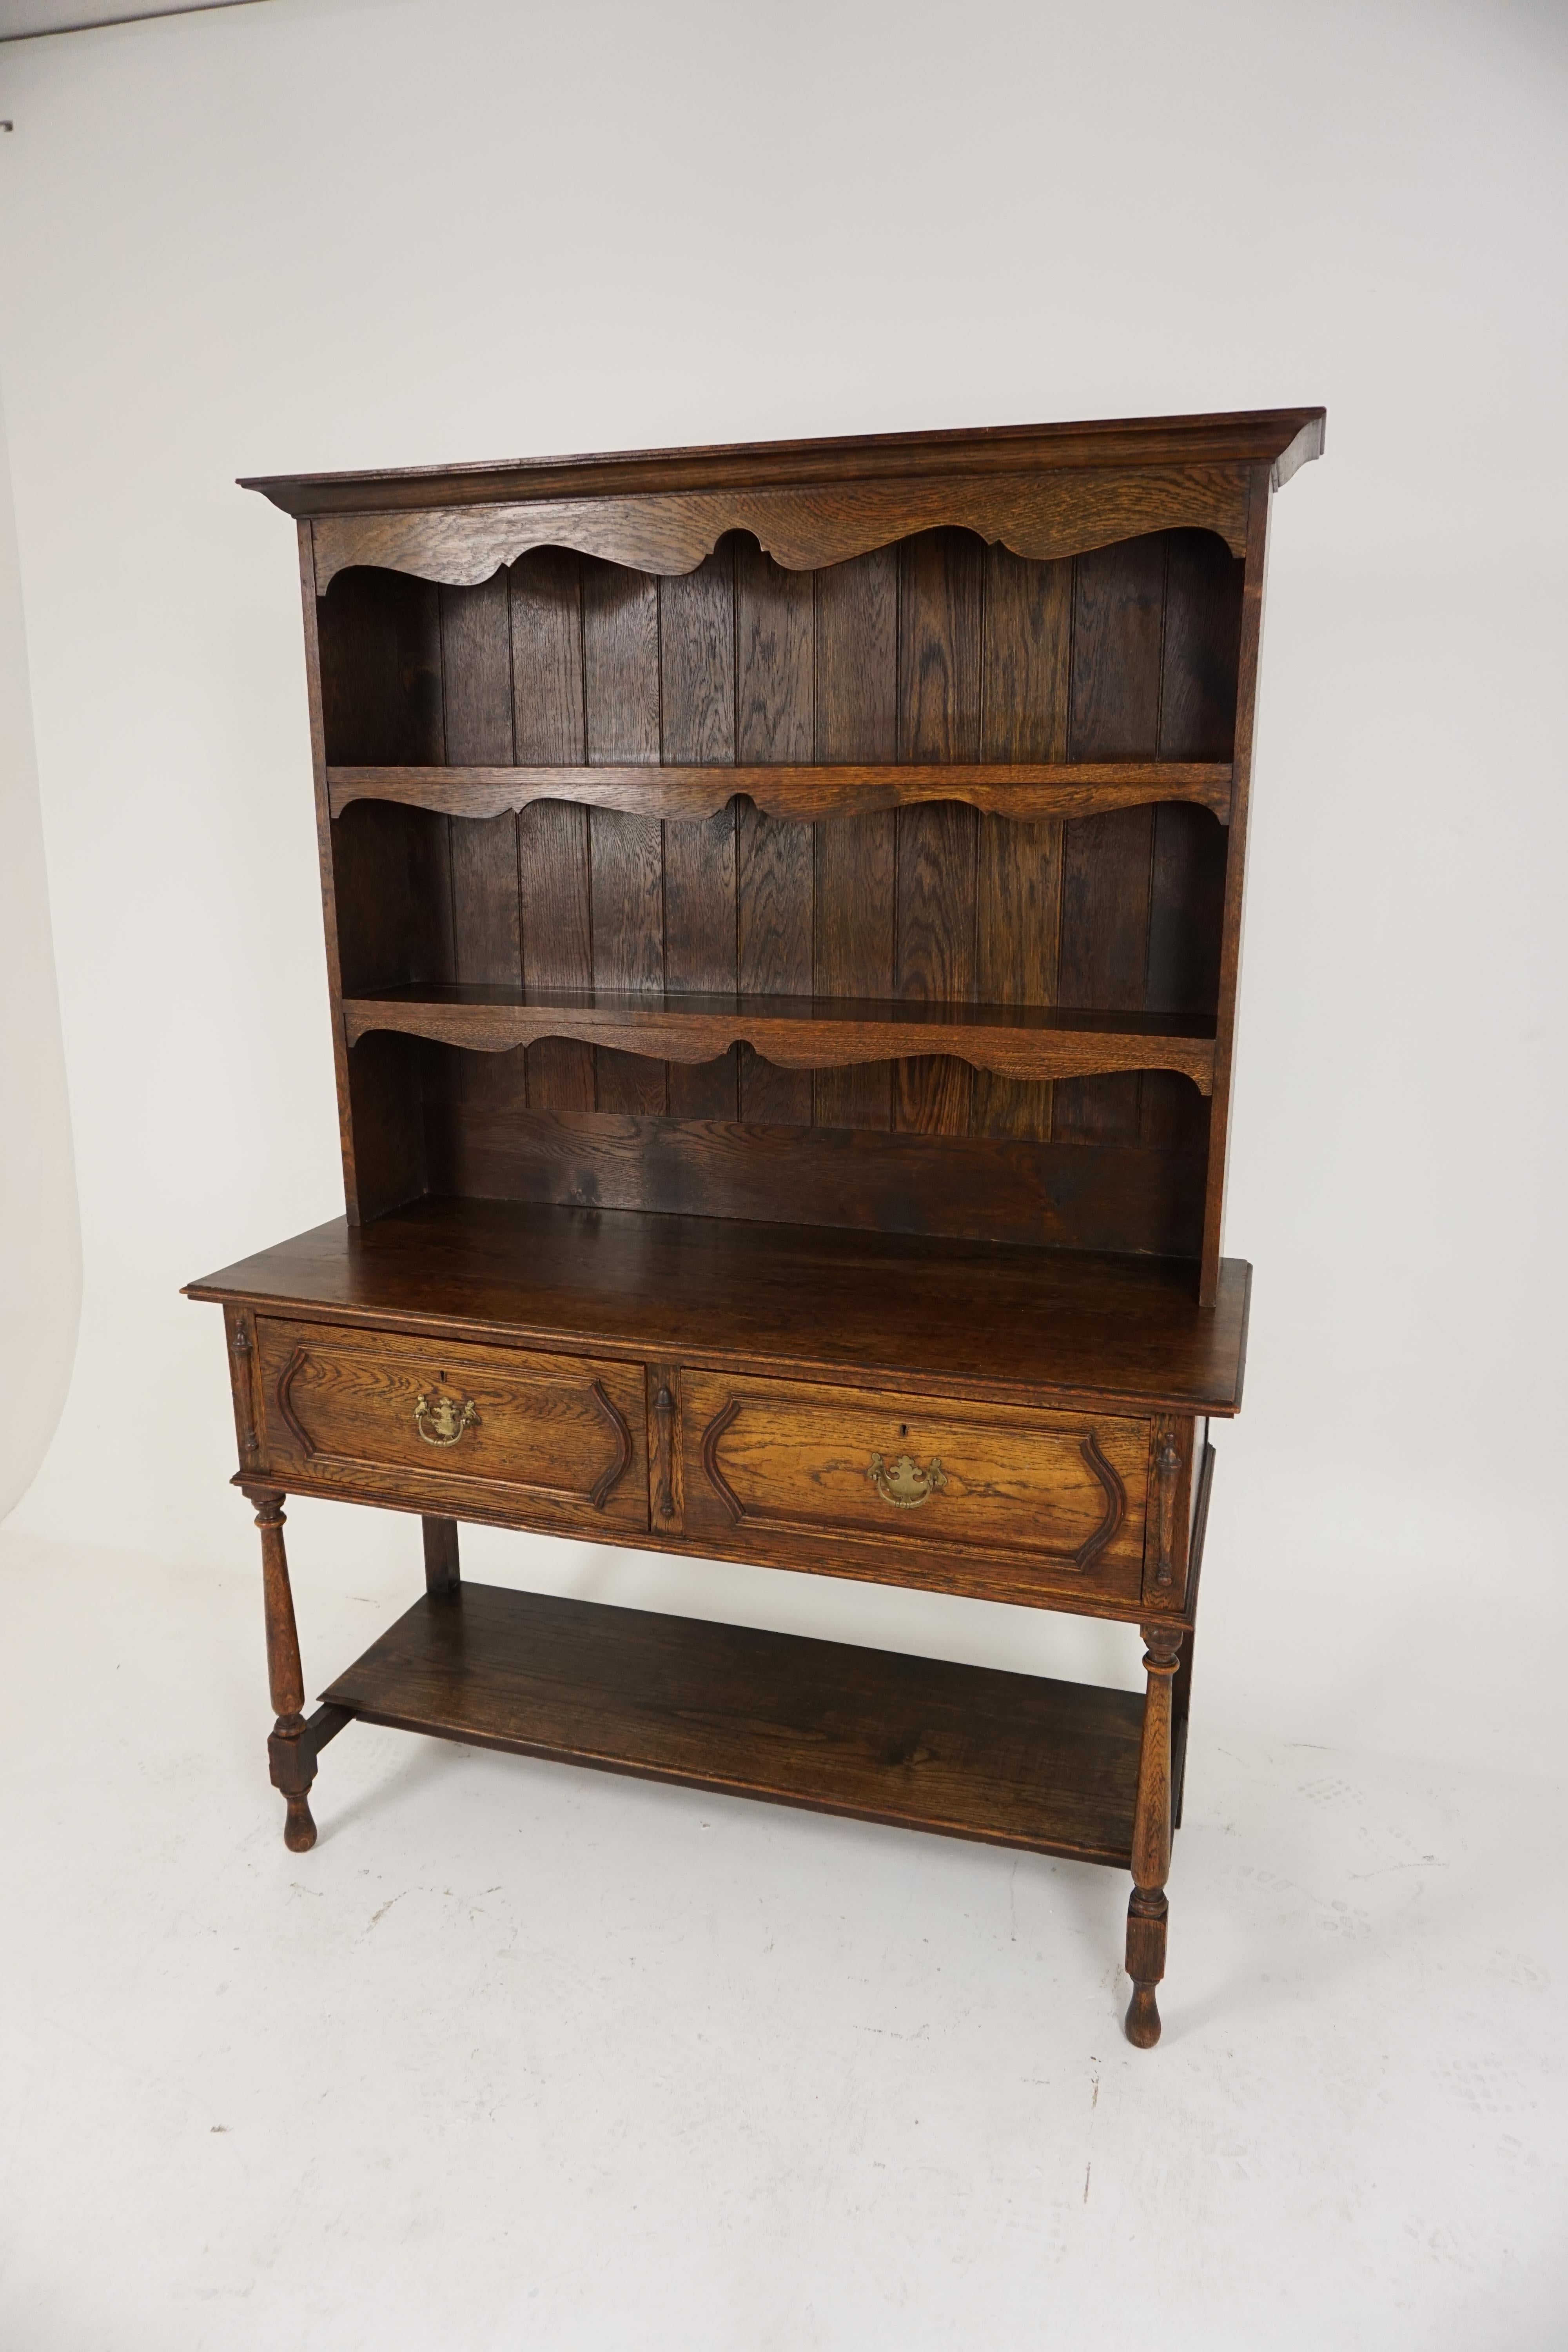 Antique oak welsh dresser, sideboard, buffet, Scotland 1910, B1825

Scotland, 1910
Solid oak
Original finish
Canopy top
Shaped frieze below
Fitted with open shelves underneath
All fitted with solid backboards
Base with rectangular top
Pair